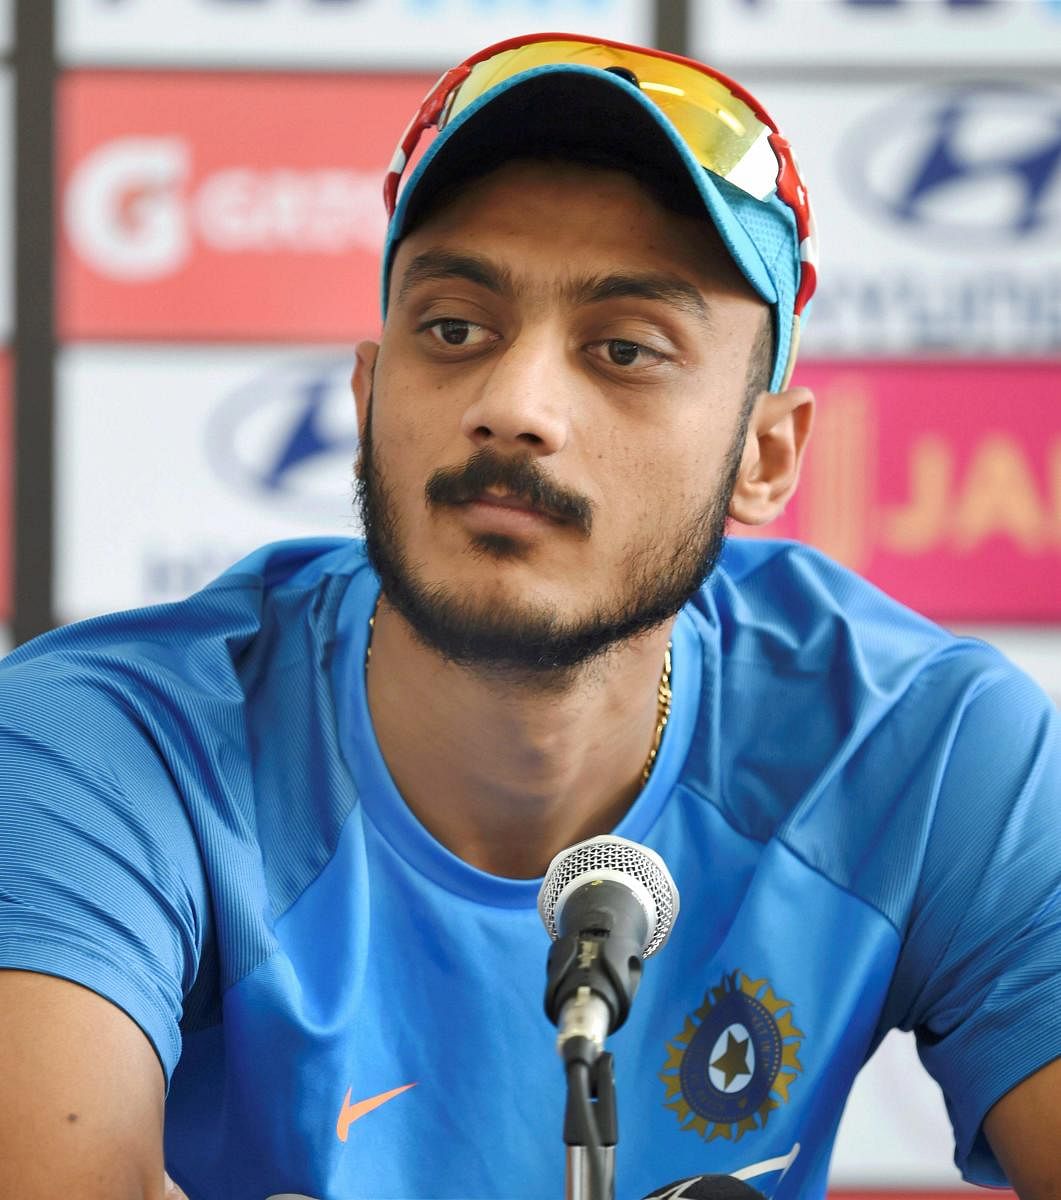 Indian cricketer Axar Patel during a press conference ahead of T20 cricket match against New Zealand in Rajkot on Friday. PTI Photo